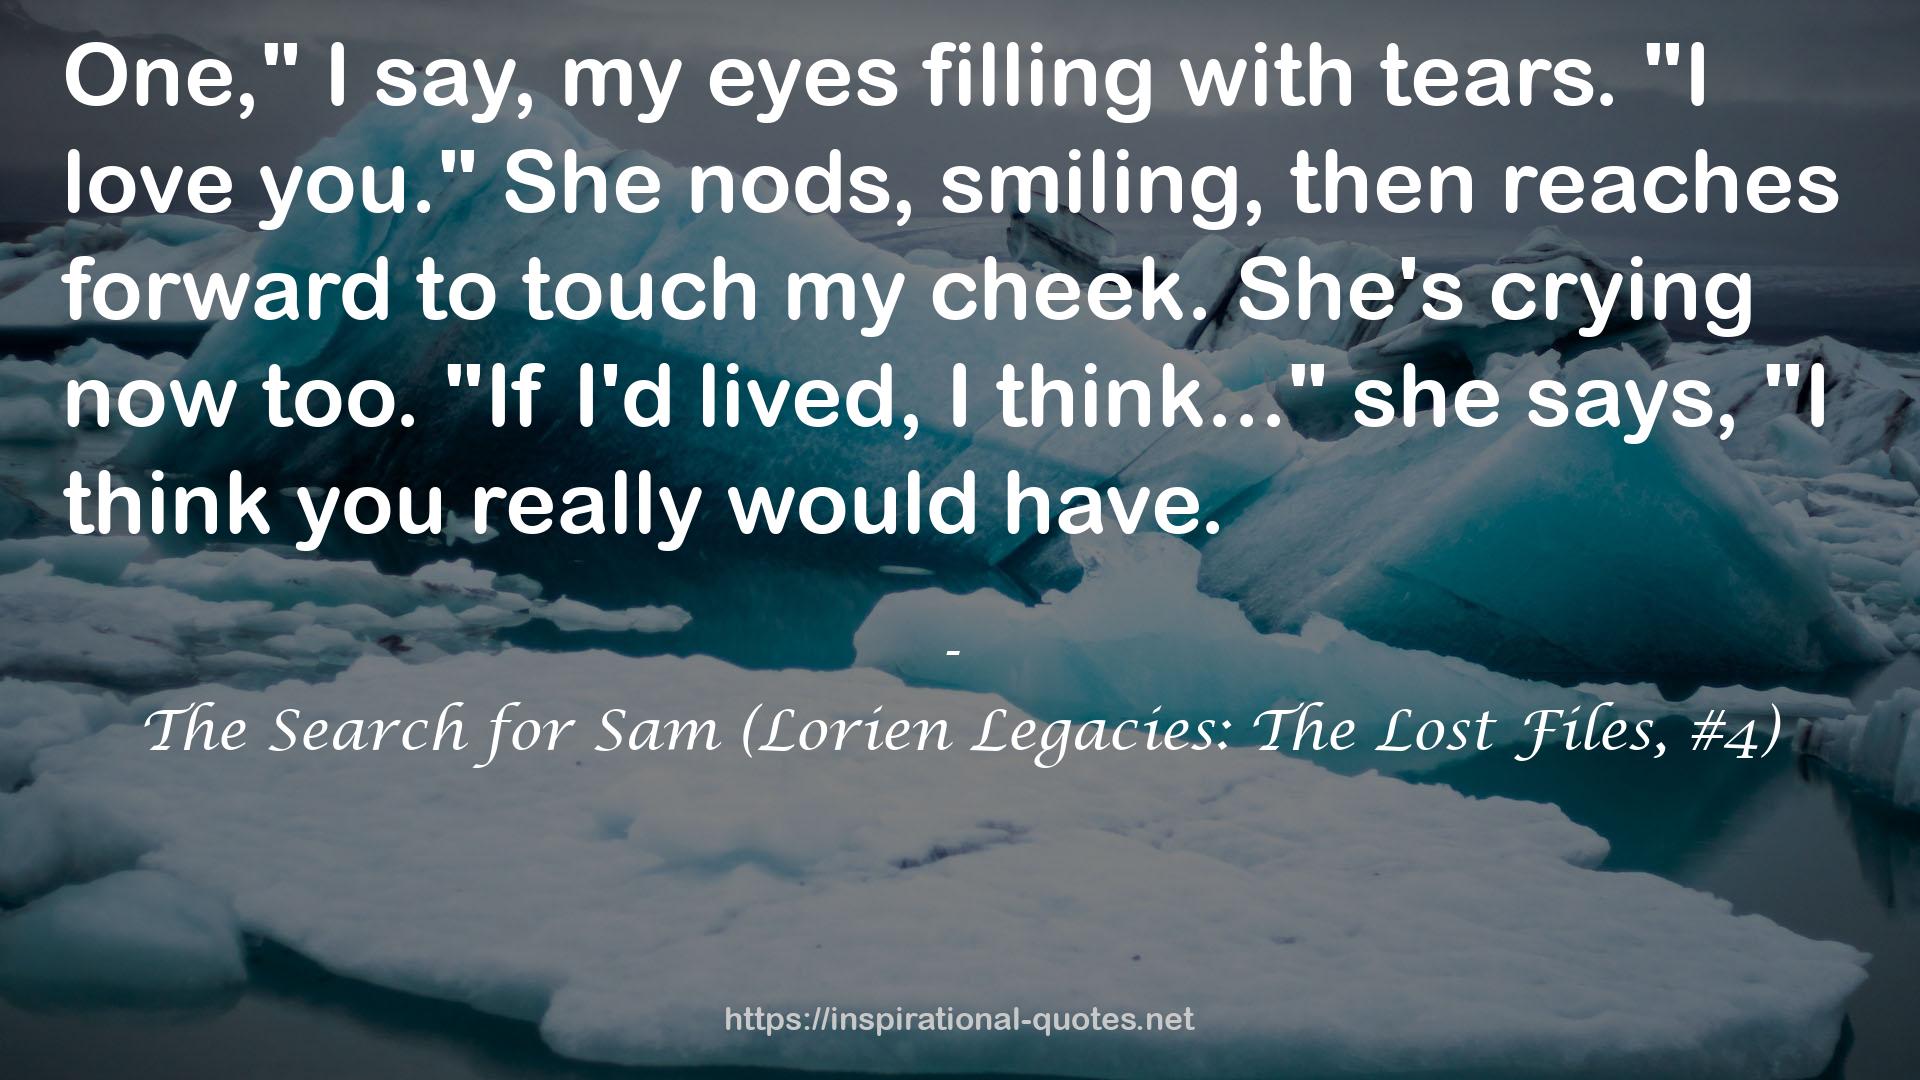 The Search for Sam (Lorien Legacies: The Lost Files, #4) QUOTES